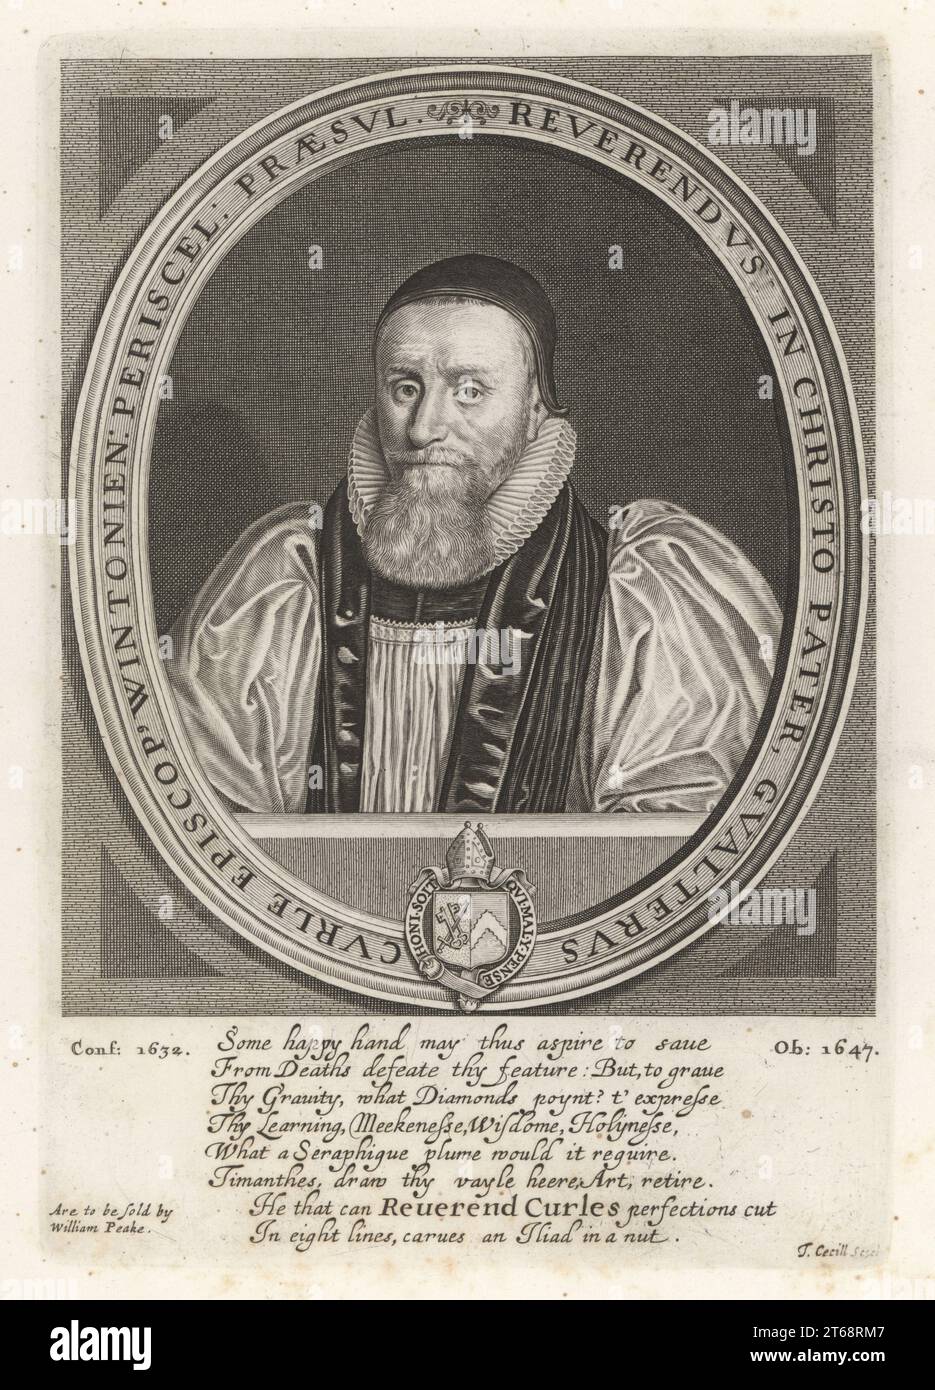 Walter Curle, Bishop of Winchester, English theologian. In skull cap, ruff collar and ecclesiastical robes, 1575-1647. Gualterus Curle Episco Wintonien. Original plate by Thomas Cecill, with eight English verses sold by WIlliam Peake. Copperplate engraving from Samuel Woodburns Gallery of Rare Portraits Consisting of Original Plates, George Jones, 102 St Martins Lane, London, 1816. Stock Photo